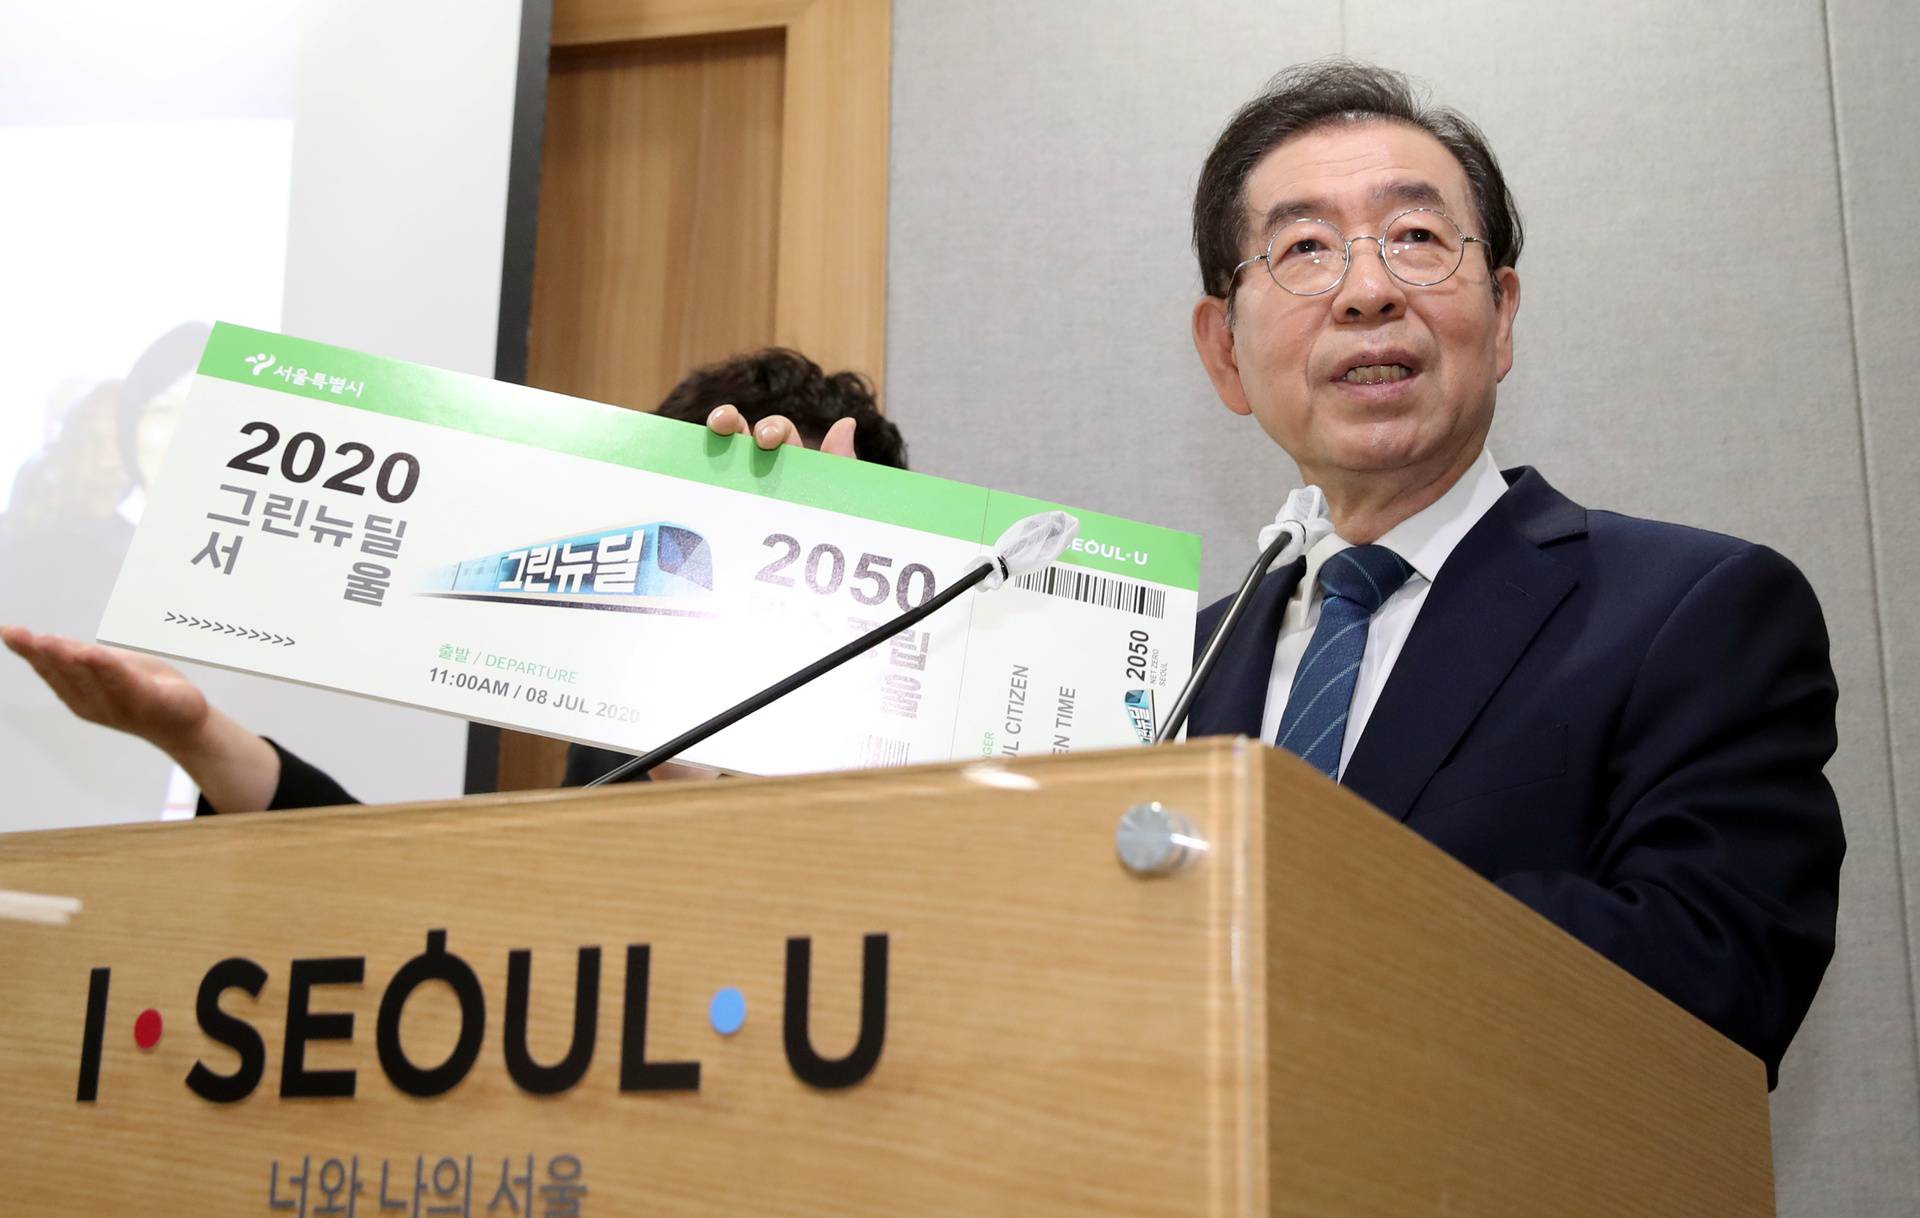 Seoul Mayor Park Won-soon speaks during an event at Seoul City Hall in Seoul